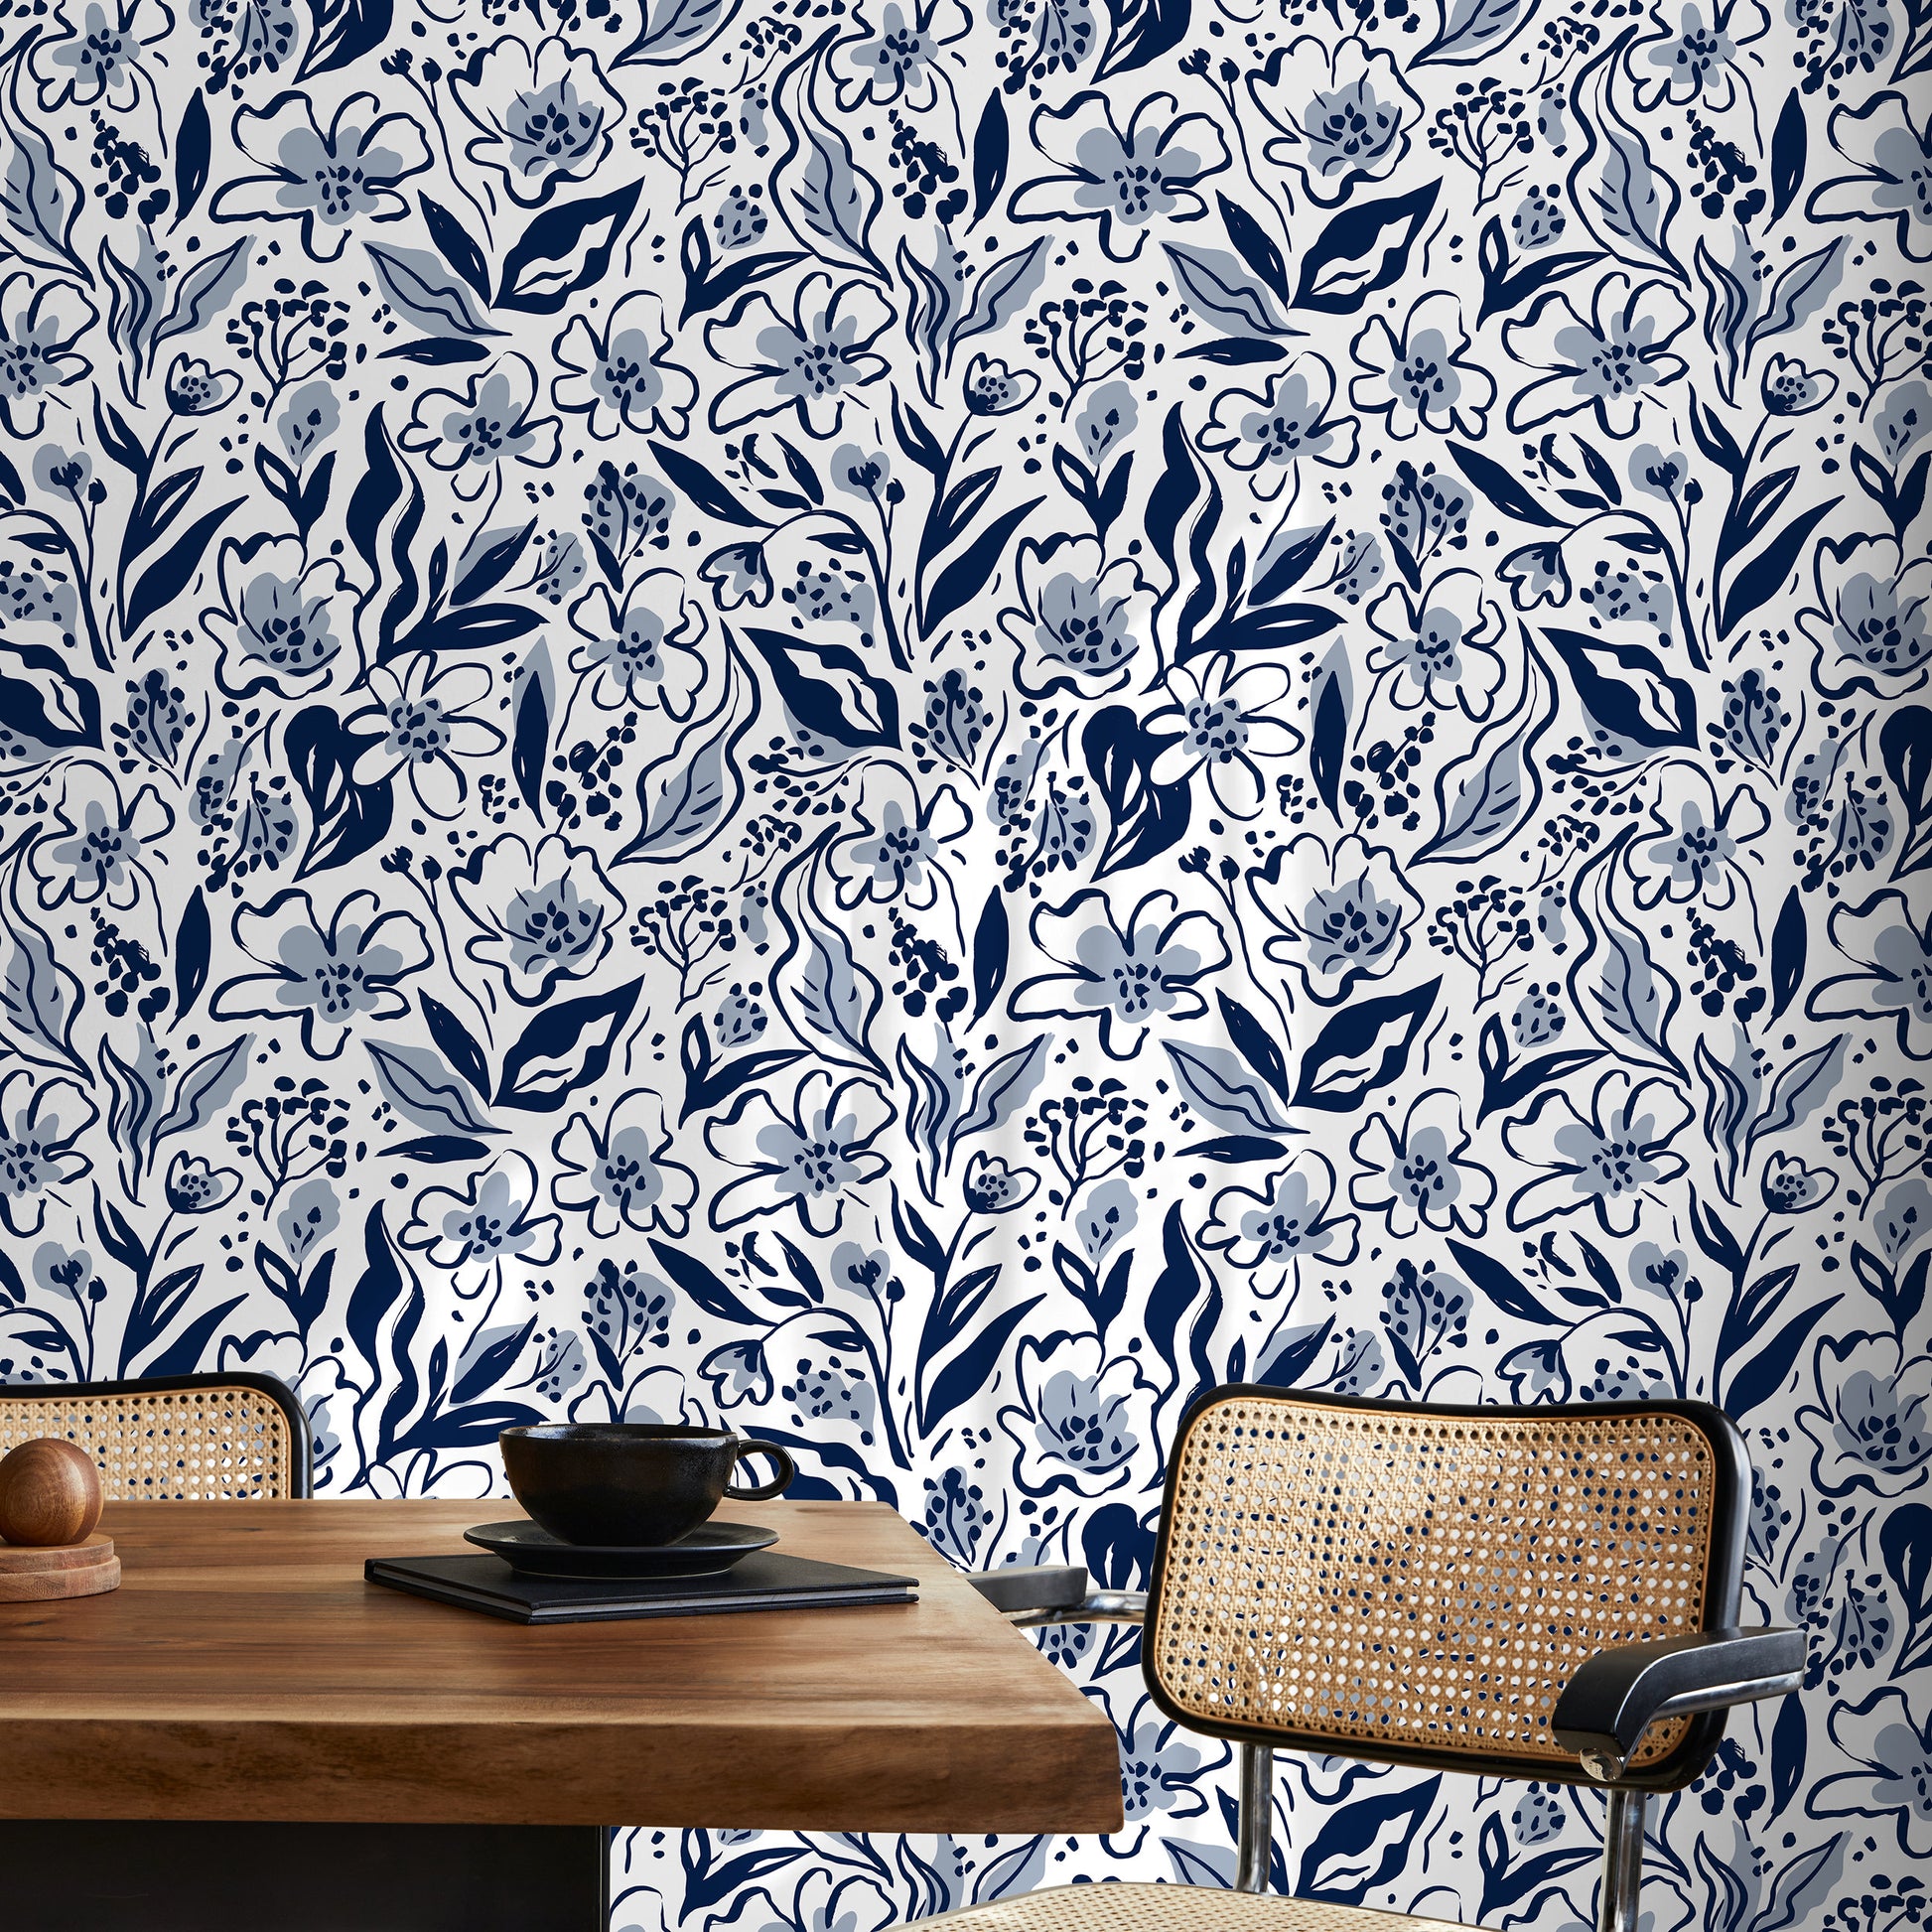 Navy Floral and Leaf Wallpaper / Peel and Stick Wallpaper Removable Wallpaper Home Decor Wall Art Wall Decor Room Decor - C692